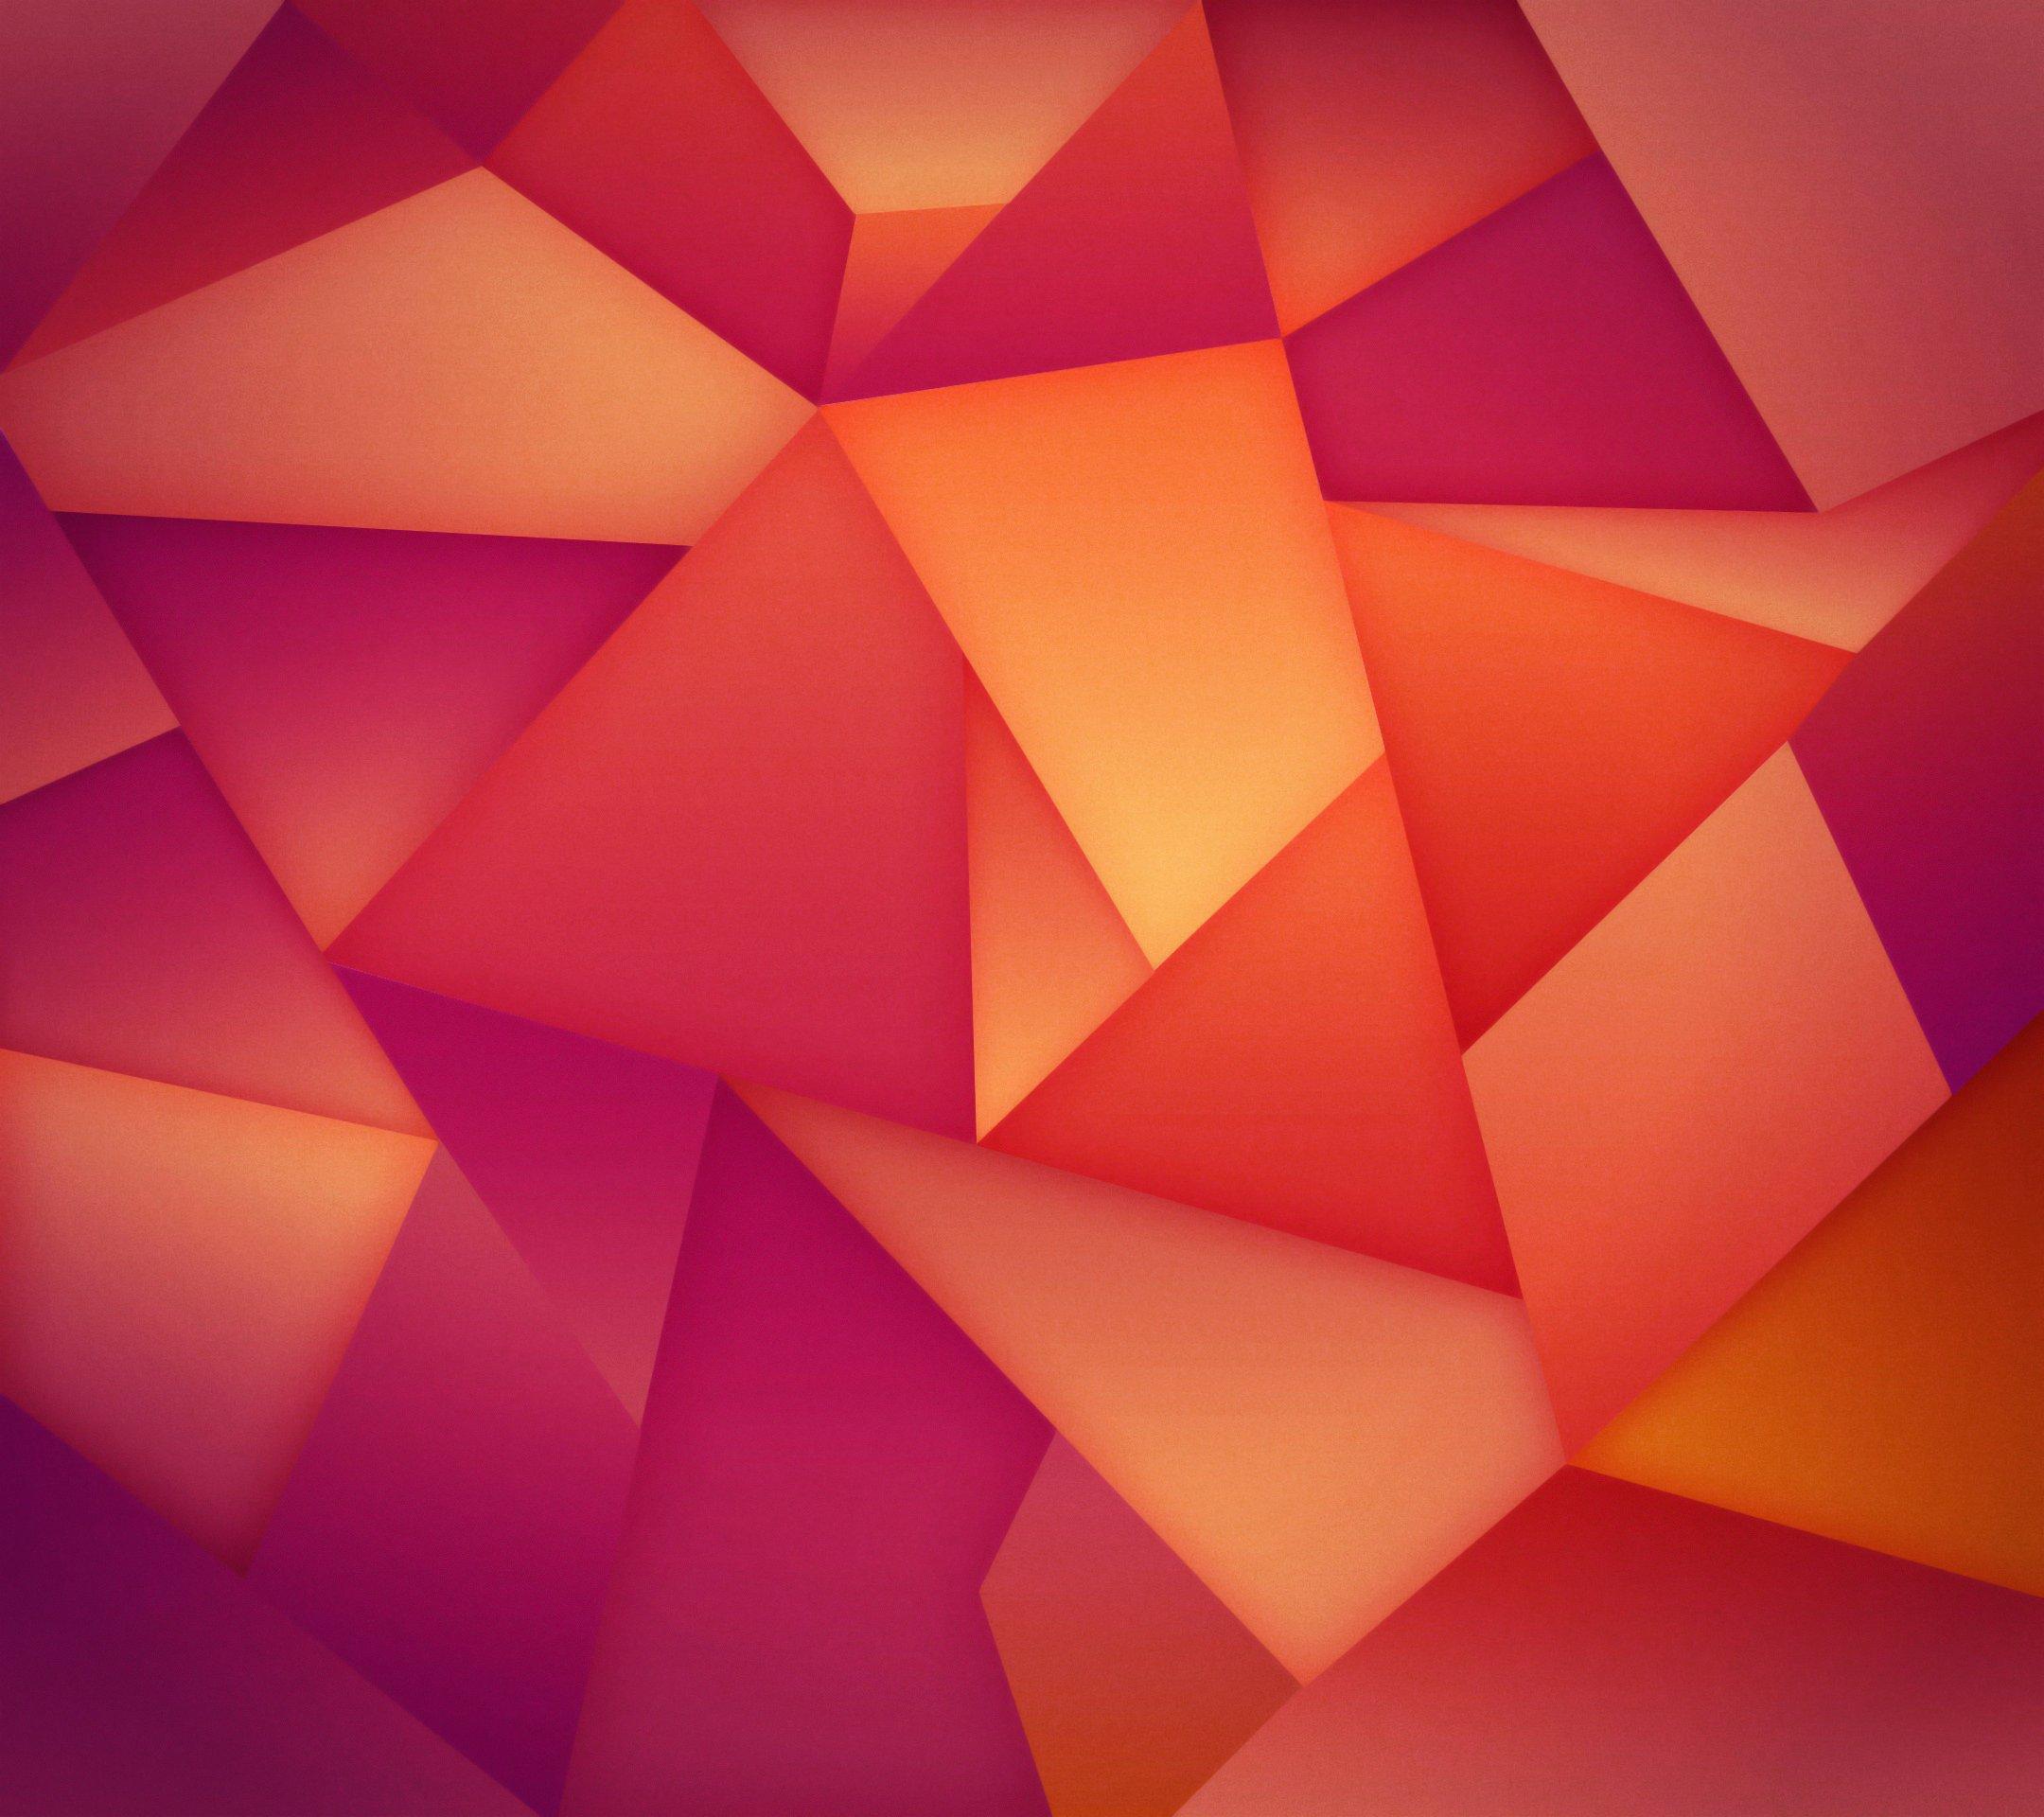 25 Awesome Samsung Galaxy s5 Wallpapers